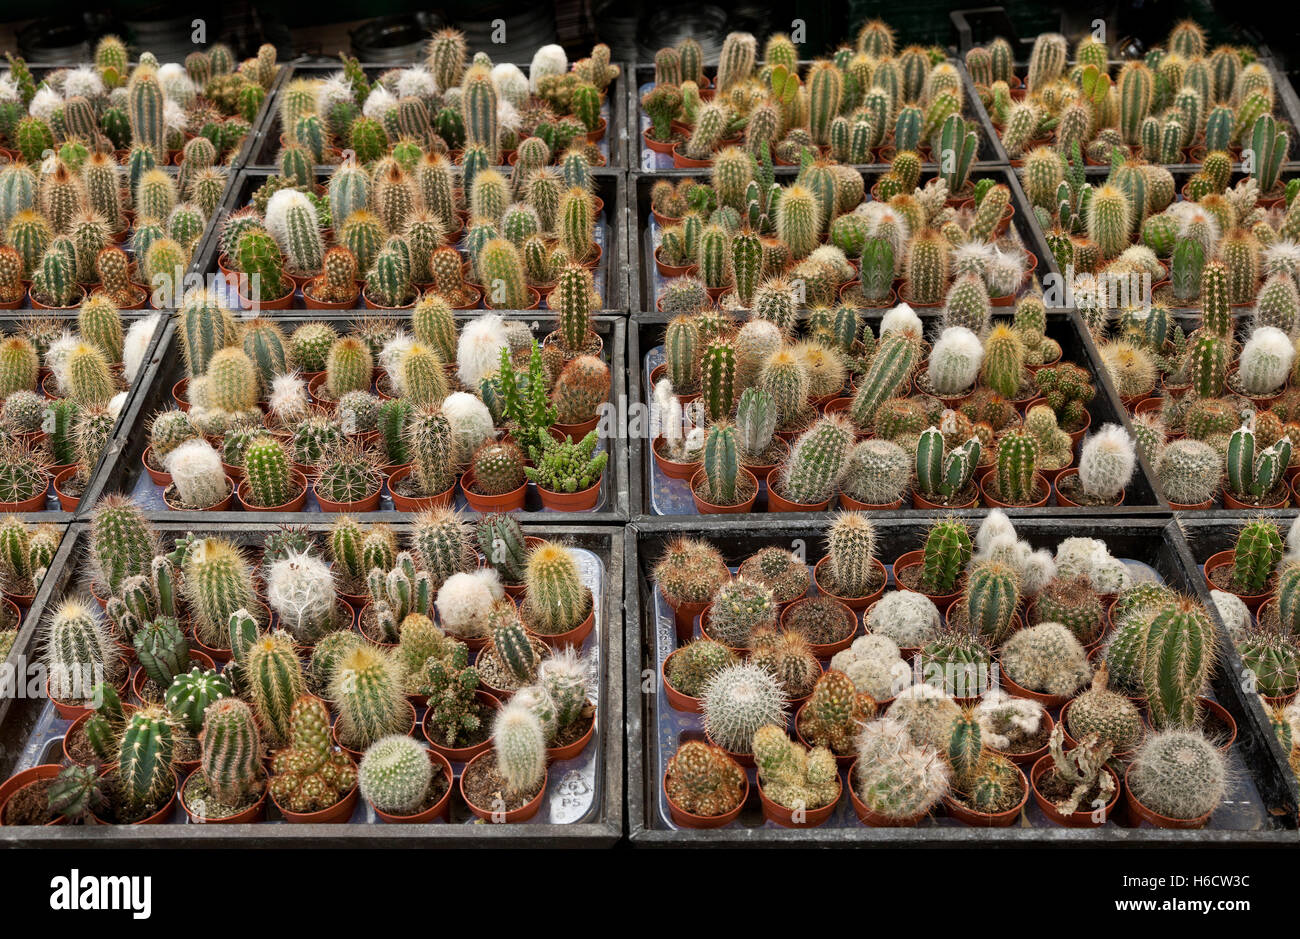 Garden centre display of small cacti plants, diverse varieties. Stock Photo